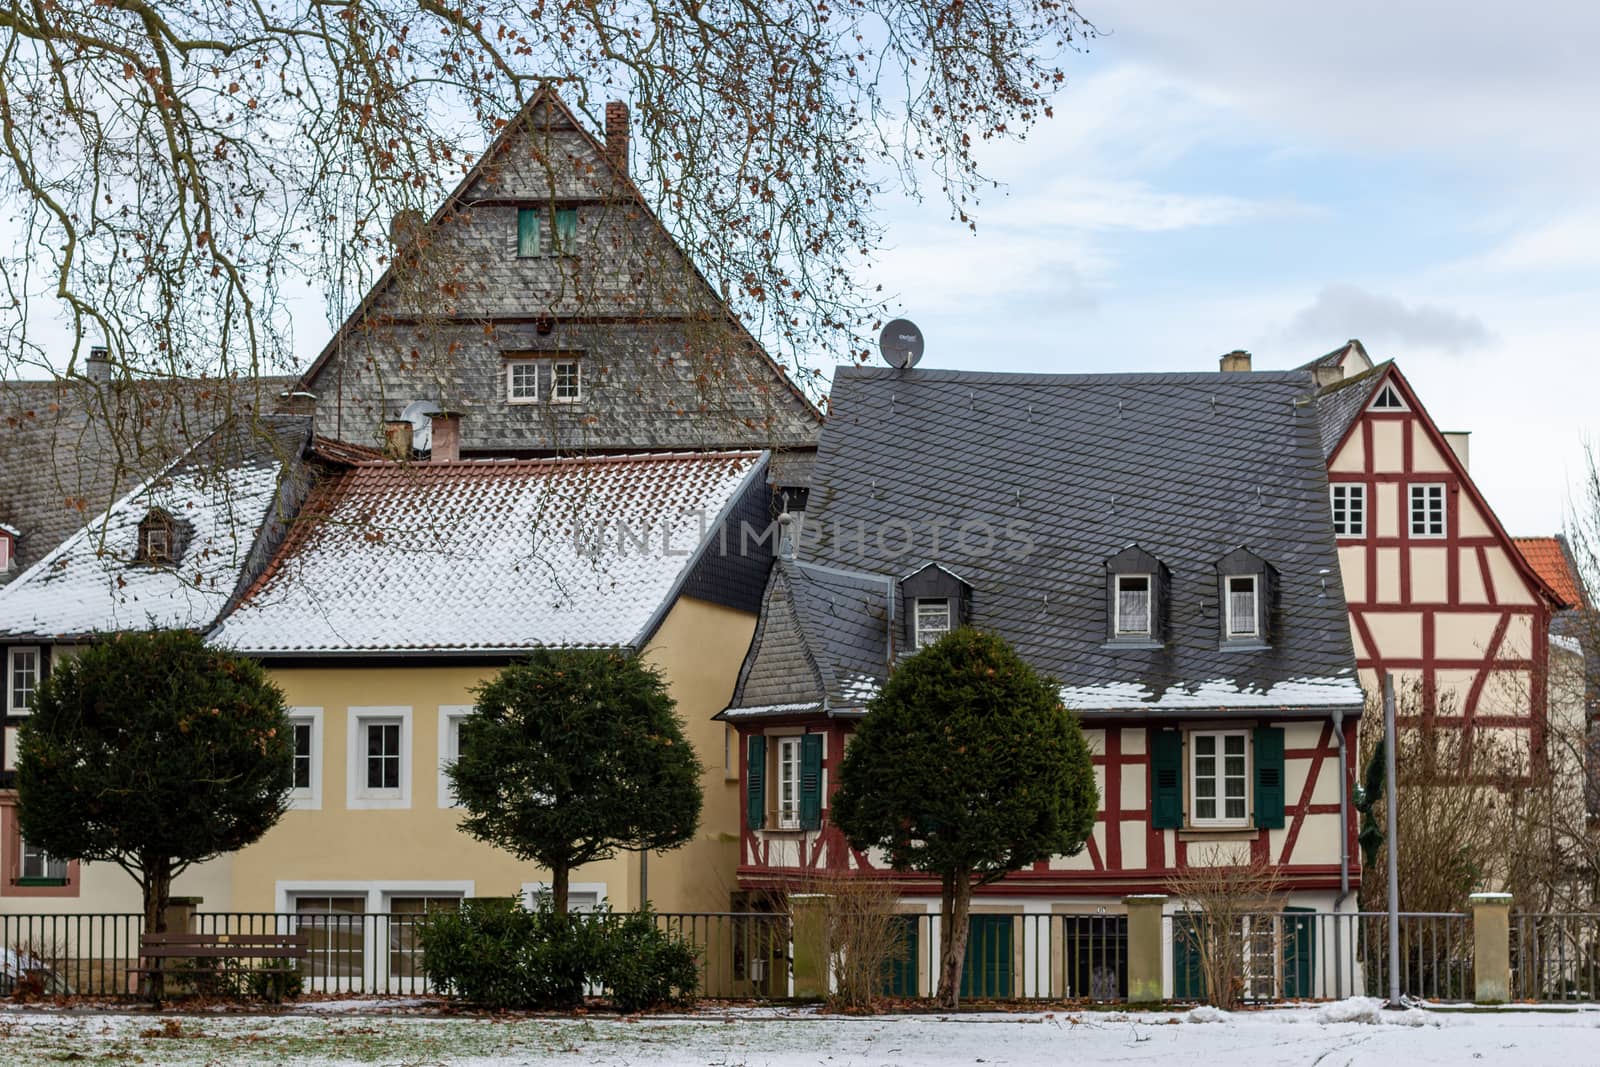 Place with half-timbered houses in Meisenheim by reinerc